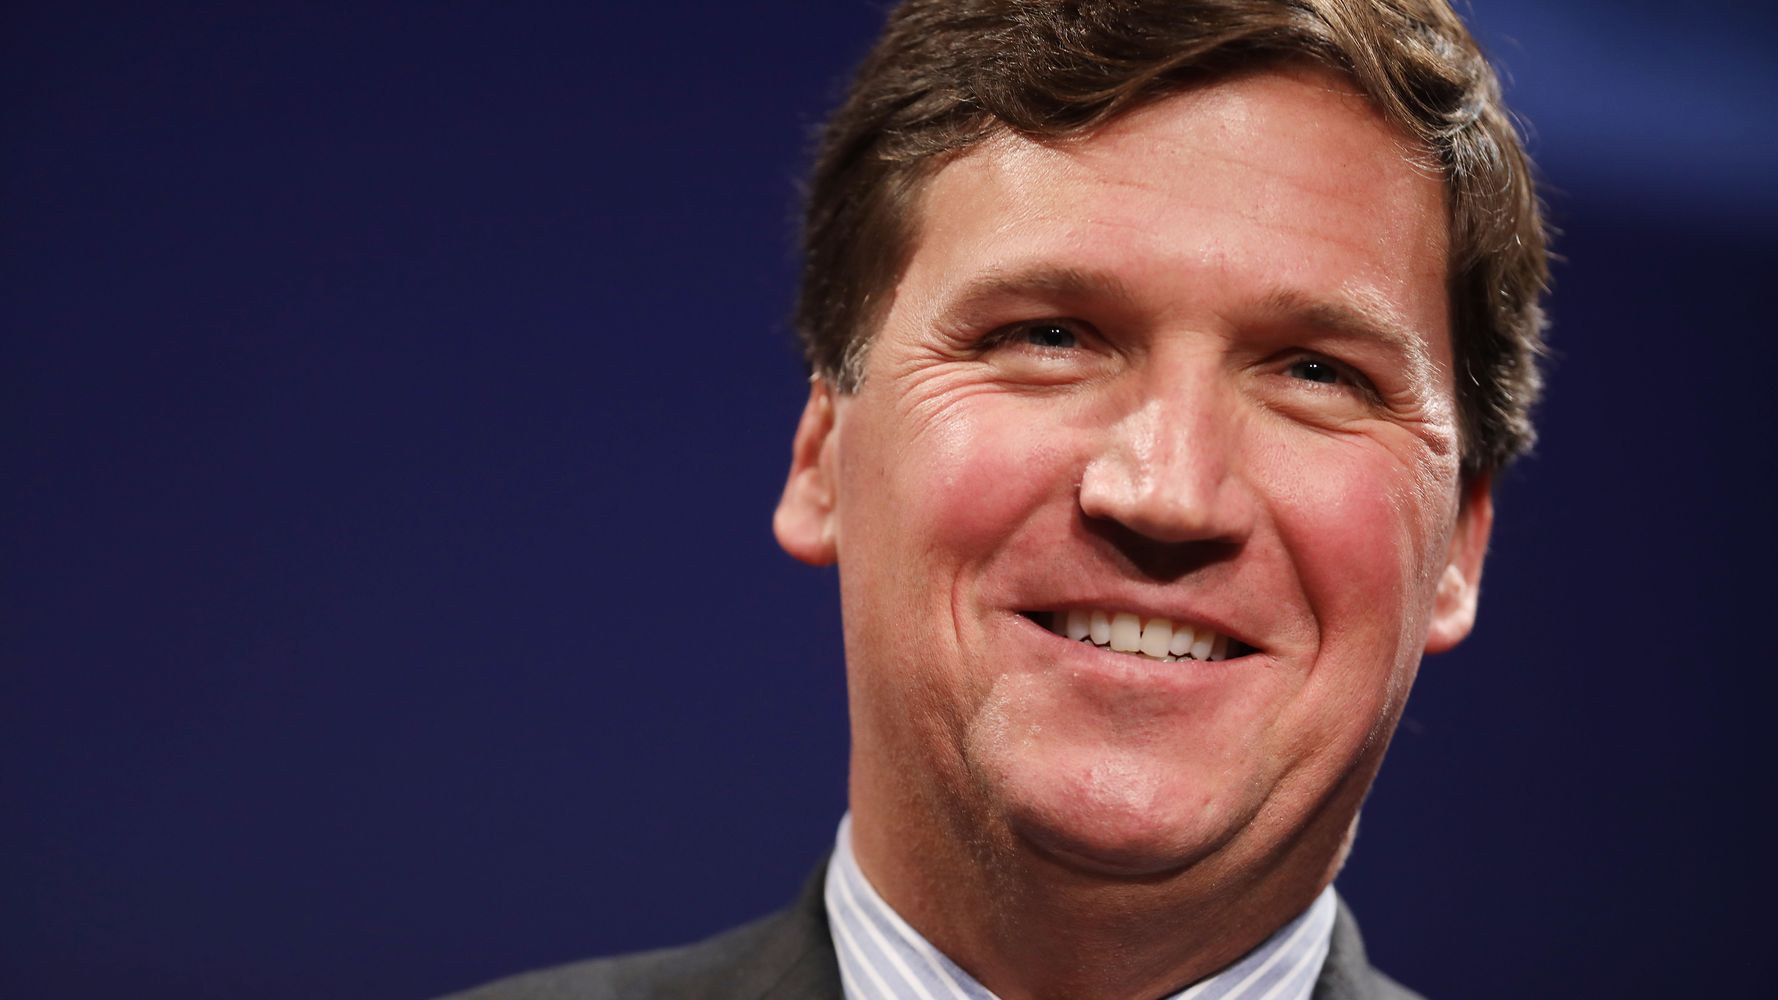 Tucker Carlson To Speak At Hungarian Far-Right Conference